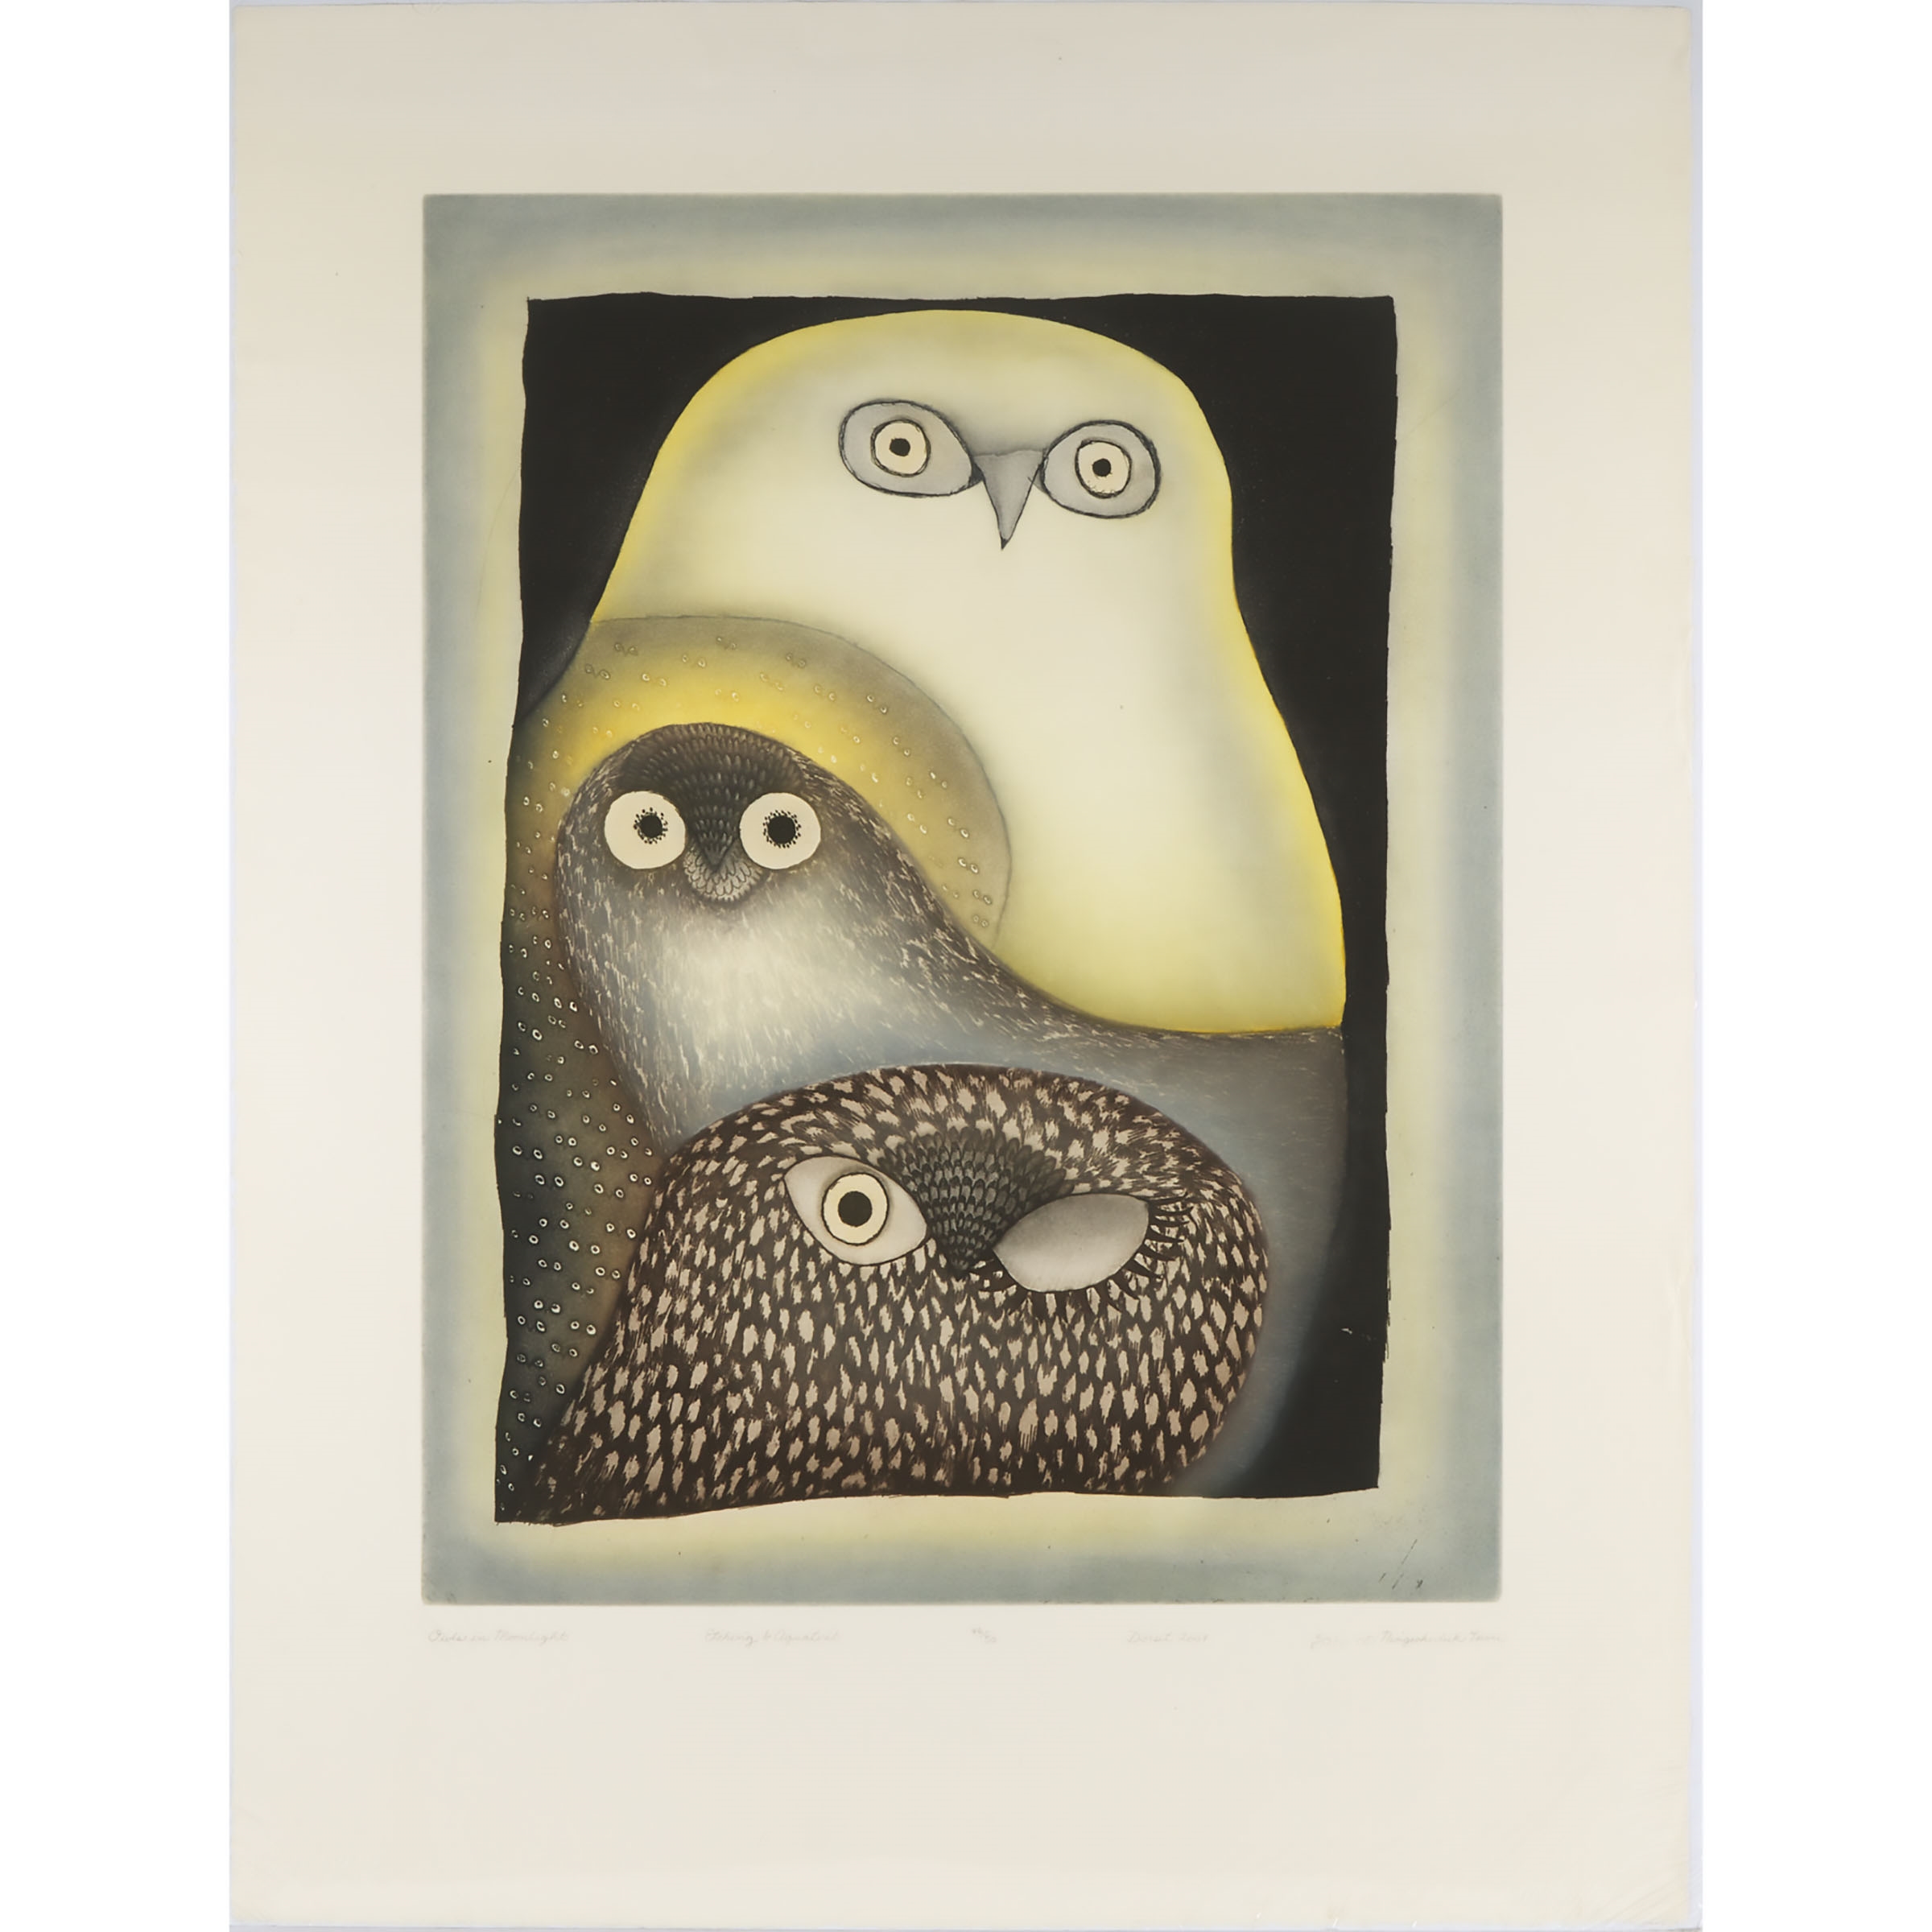 Artwork by Ningeokuluk Teevee, OWLS IN MOONLIGHT, Made of etching and aquatint